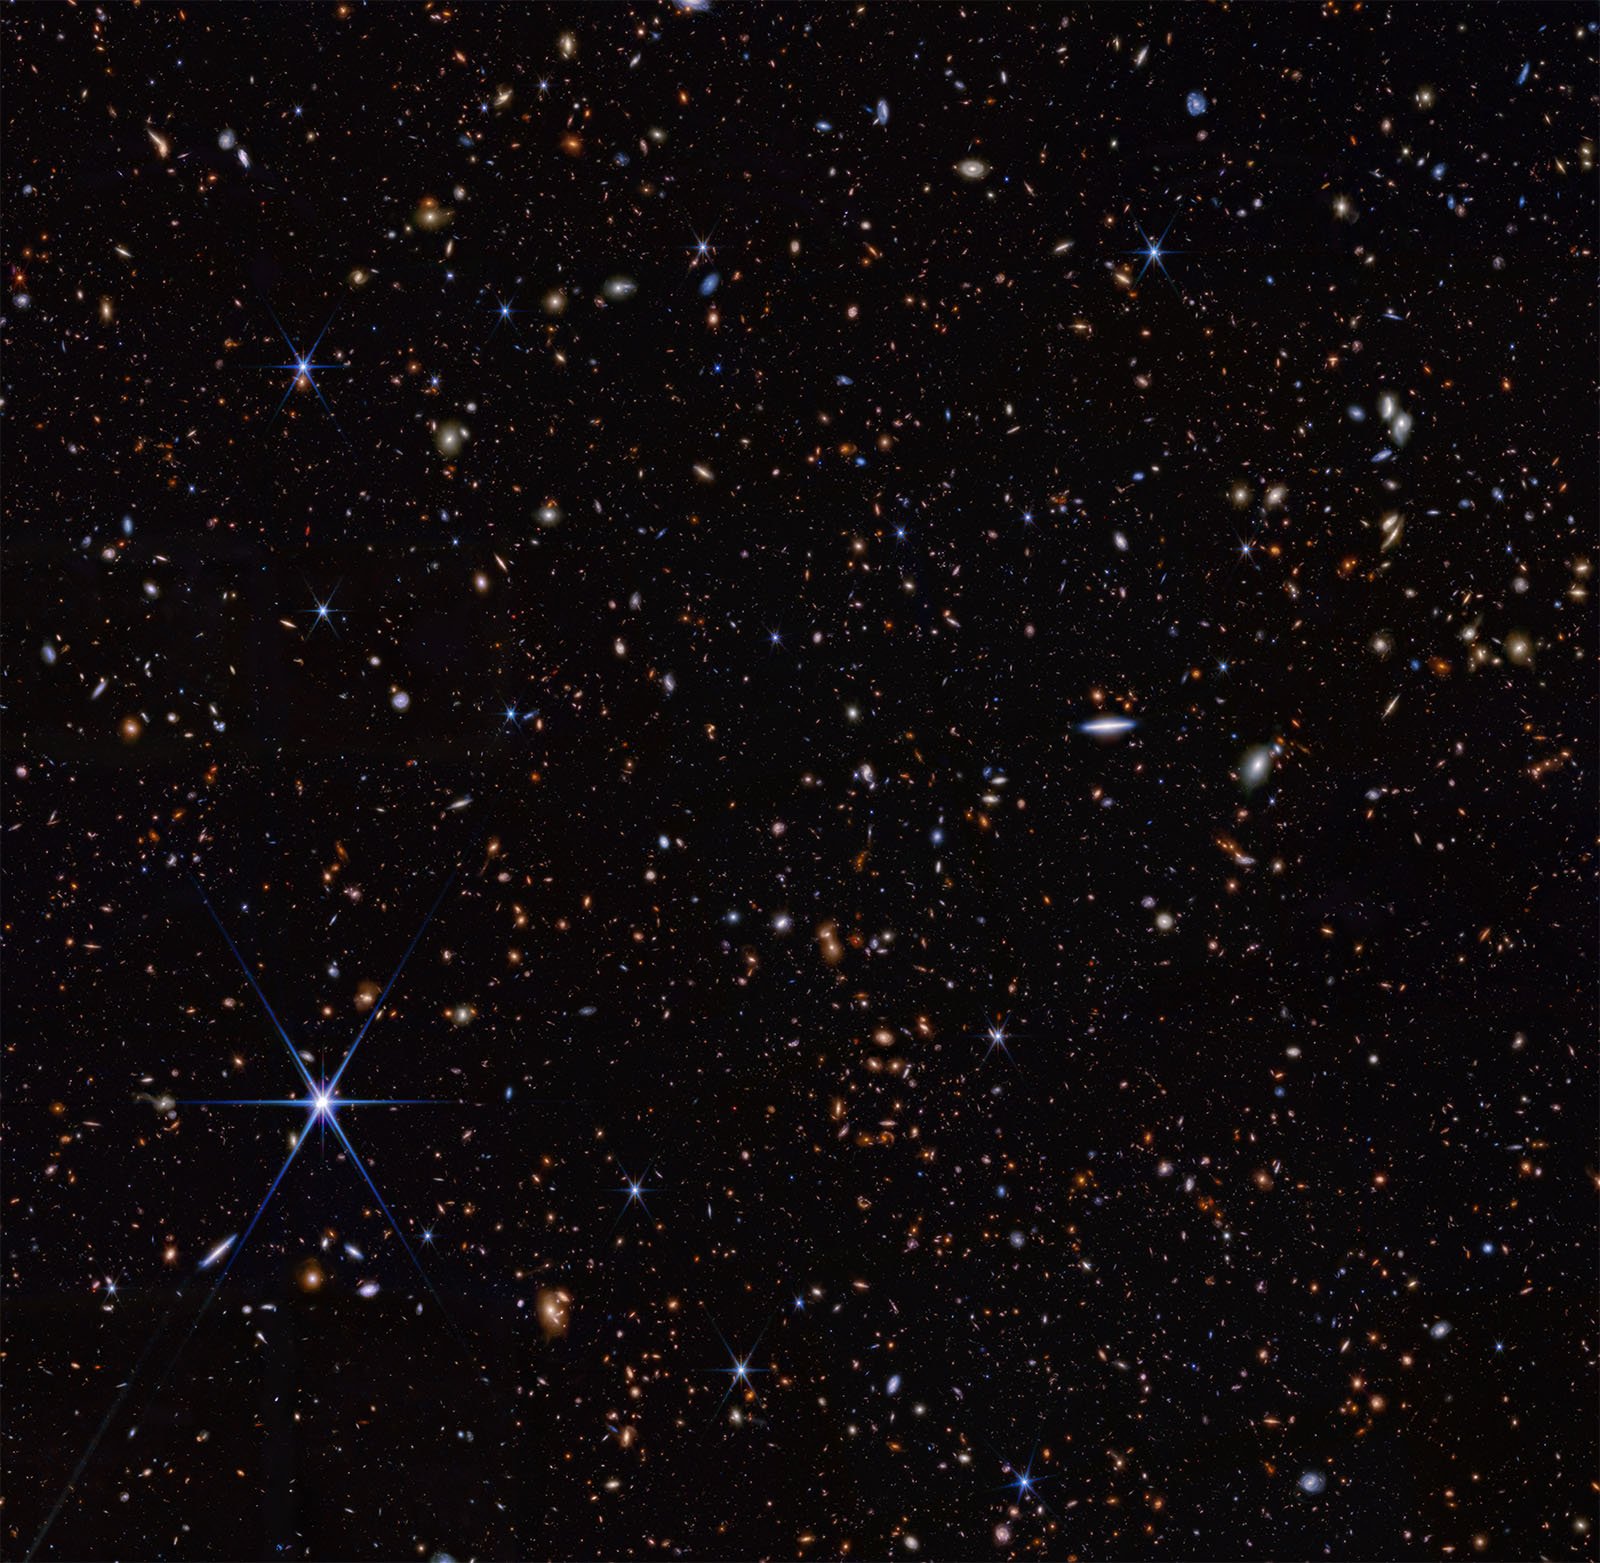 An image of a dense star field in deep space, filled with countless stars and distant galaxies. The stars vary in brightness and color, with some exhibiting a starburst effect. The background is mostly dark, highlighting the luminous points scattered throughout.